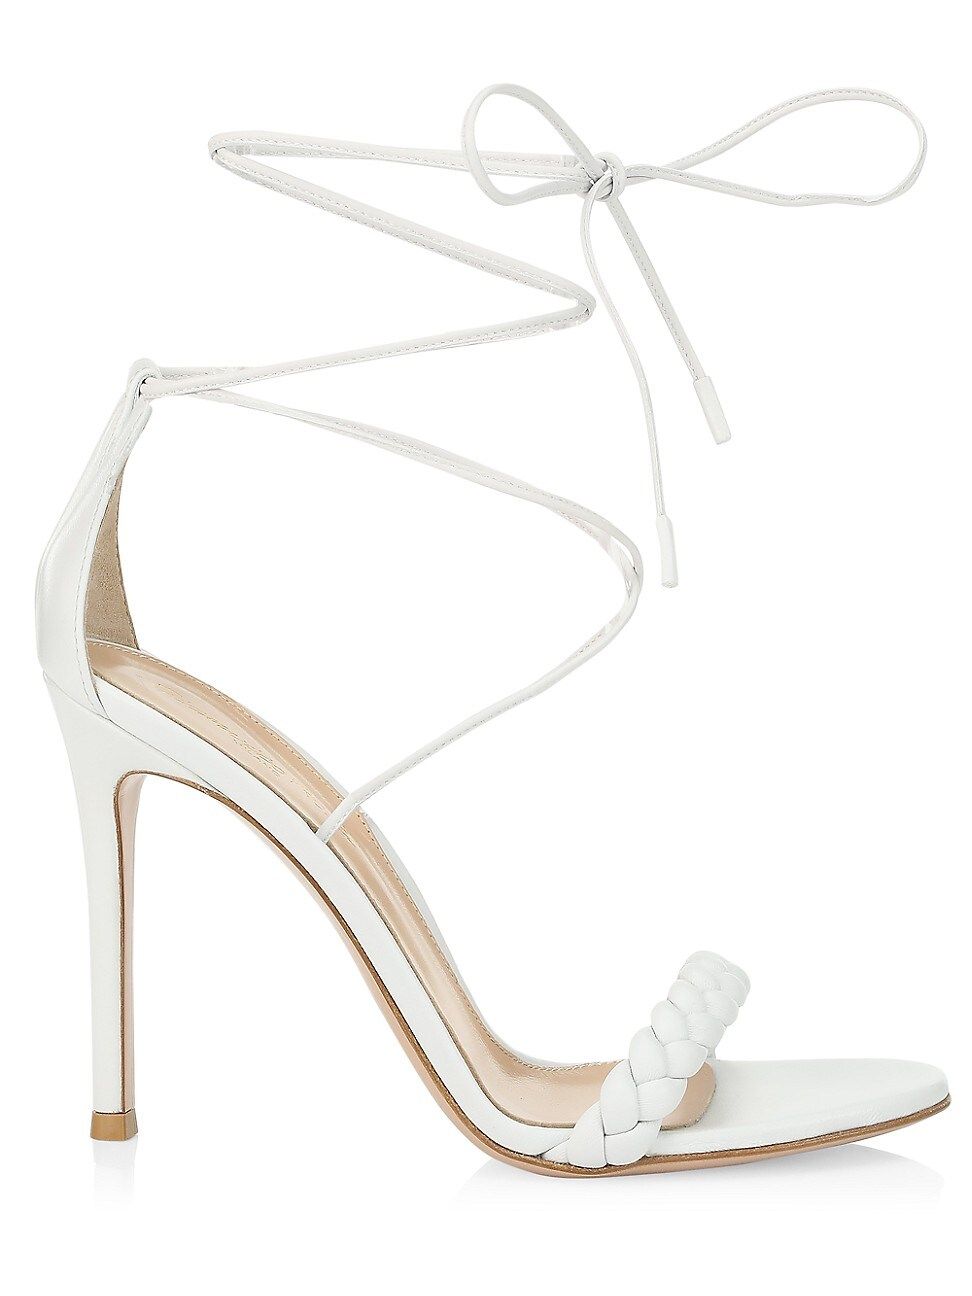 Gianvito Rossi Women's Leomi Braided Leather Sandals - White - Size 5 | Saks Fifth Avenue